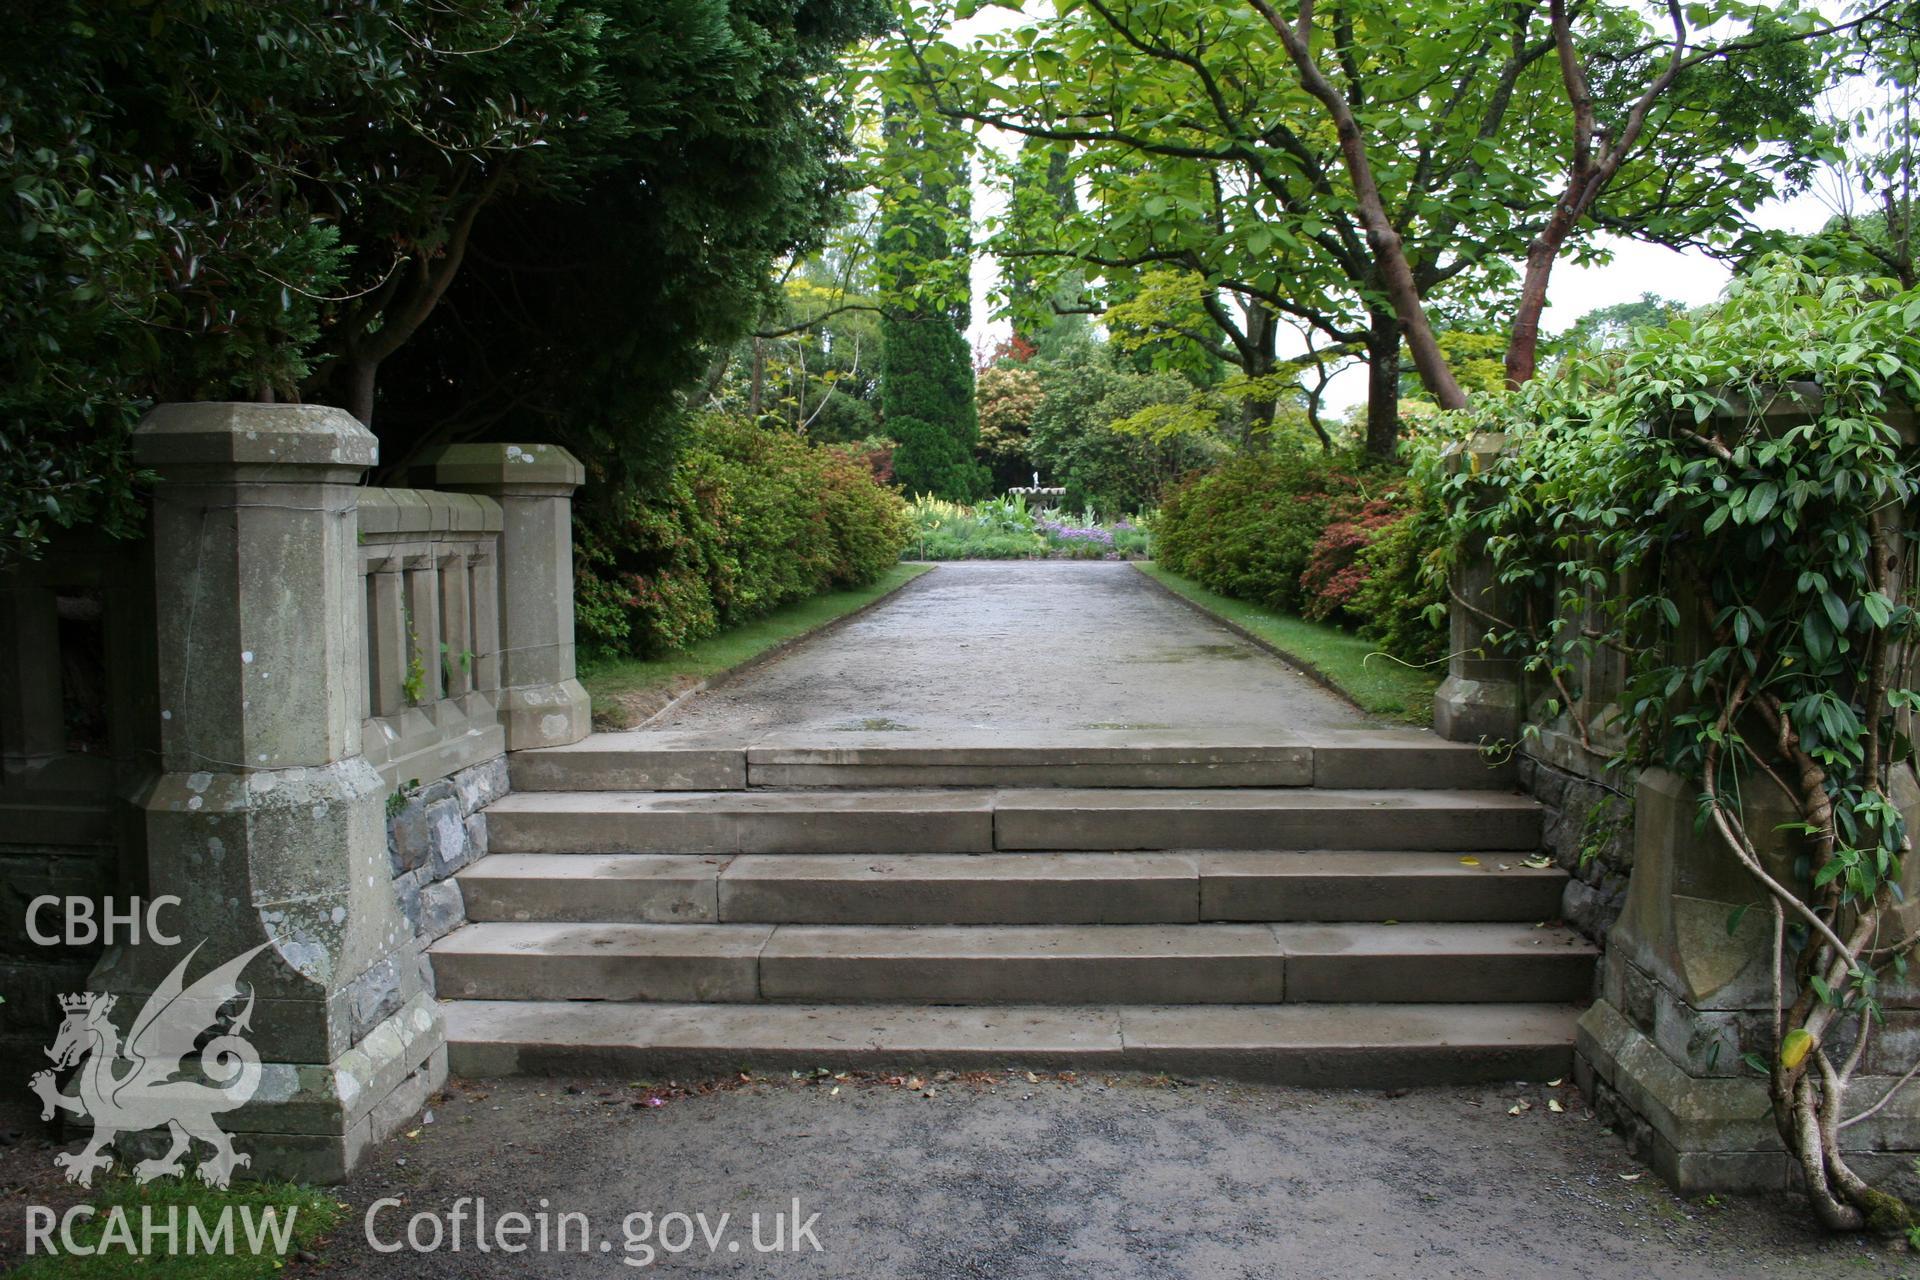 Ornamental steps from the house terrace up to the east garden, looking east.